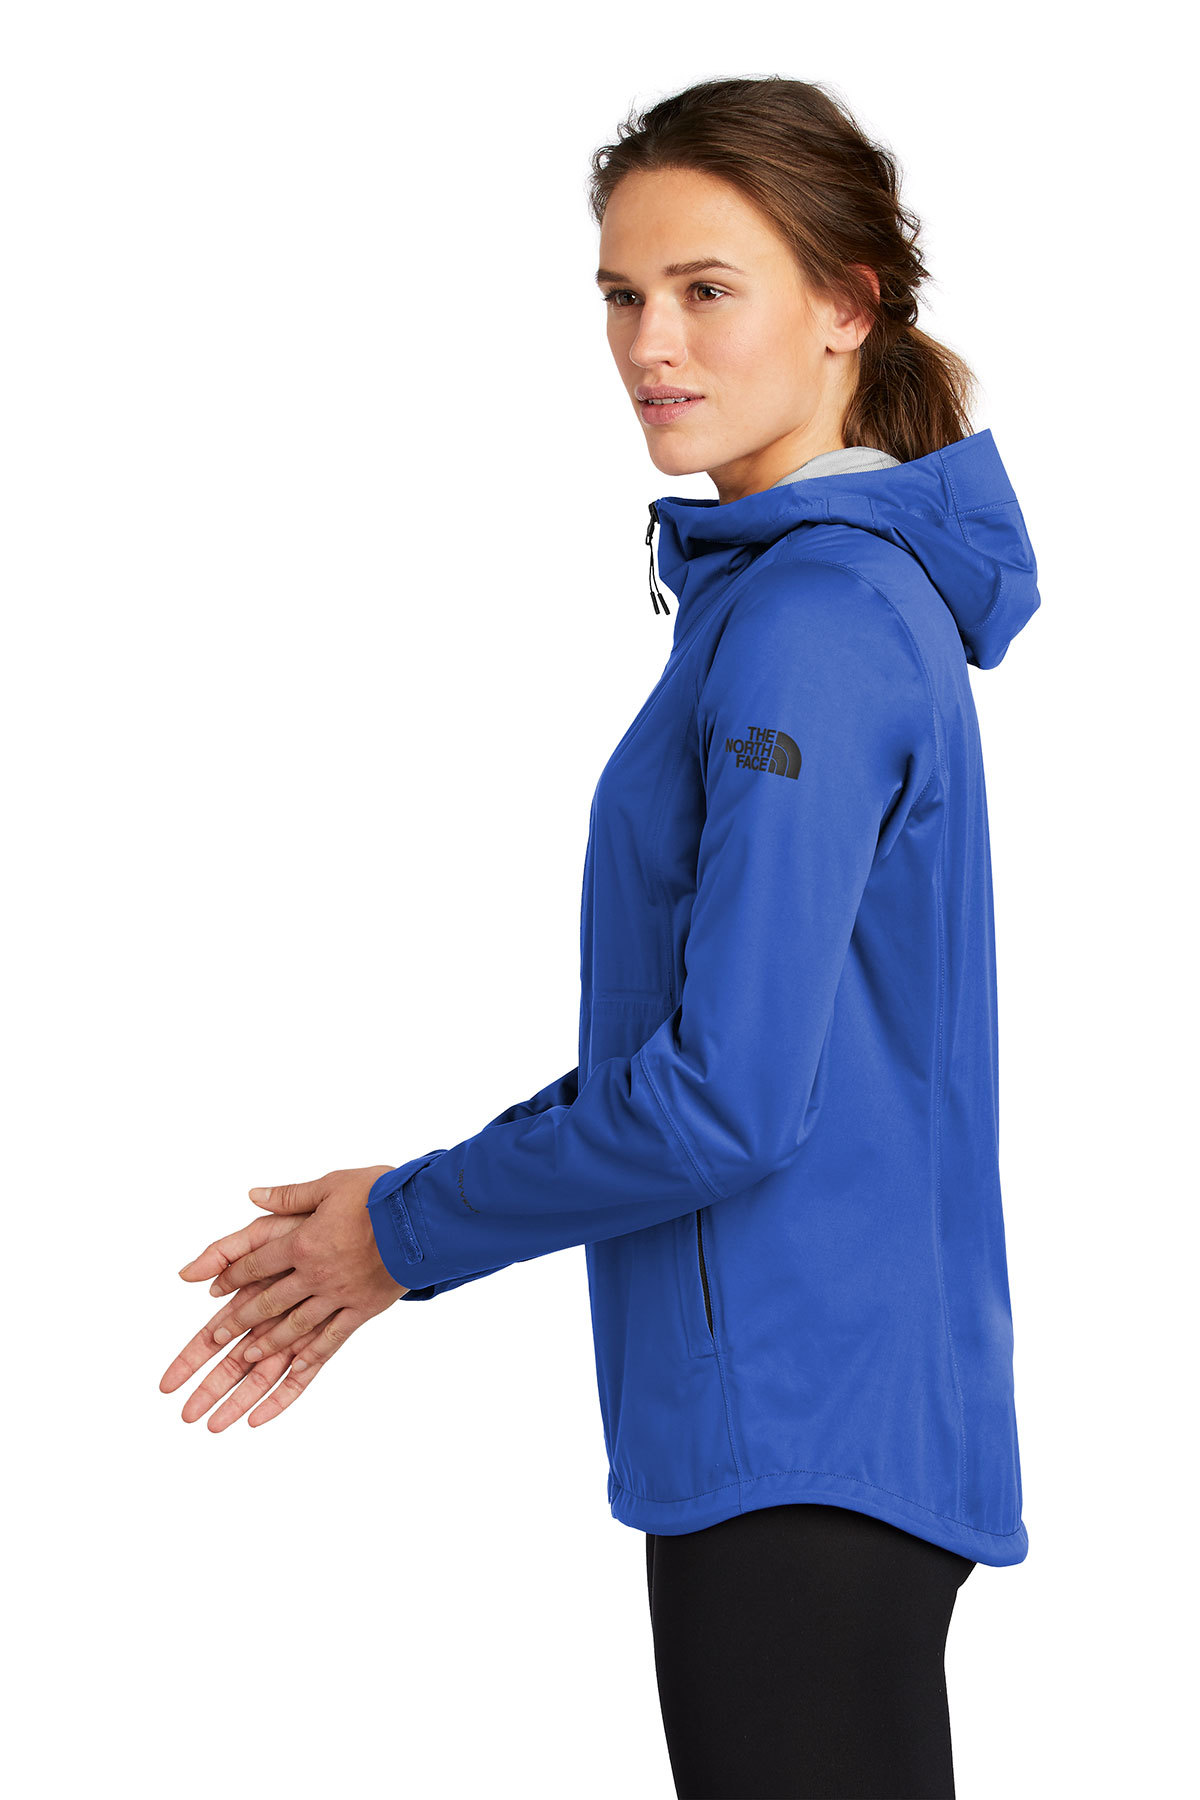 north face all weather jacket